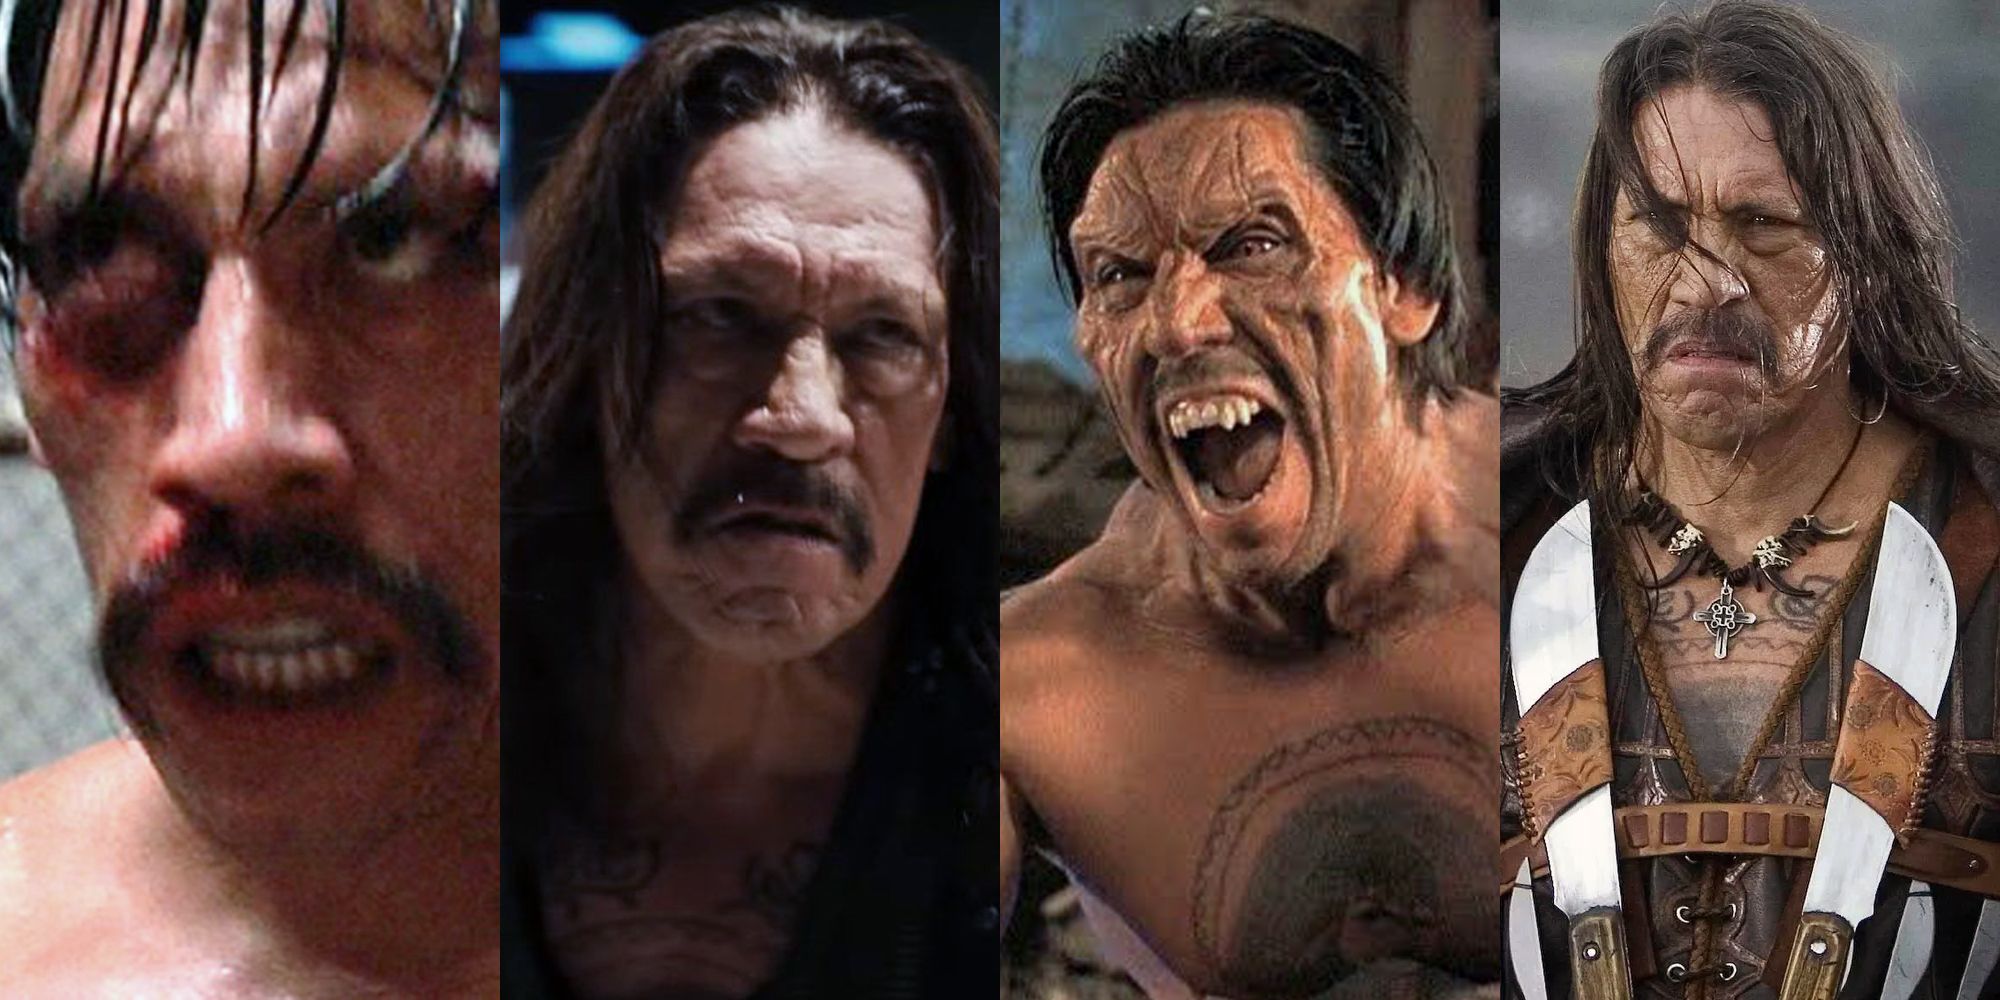 After a rough beginning, Danny Trejo has gone on to make a massive number of movies